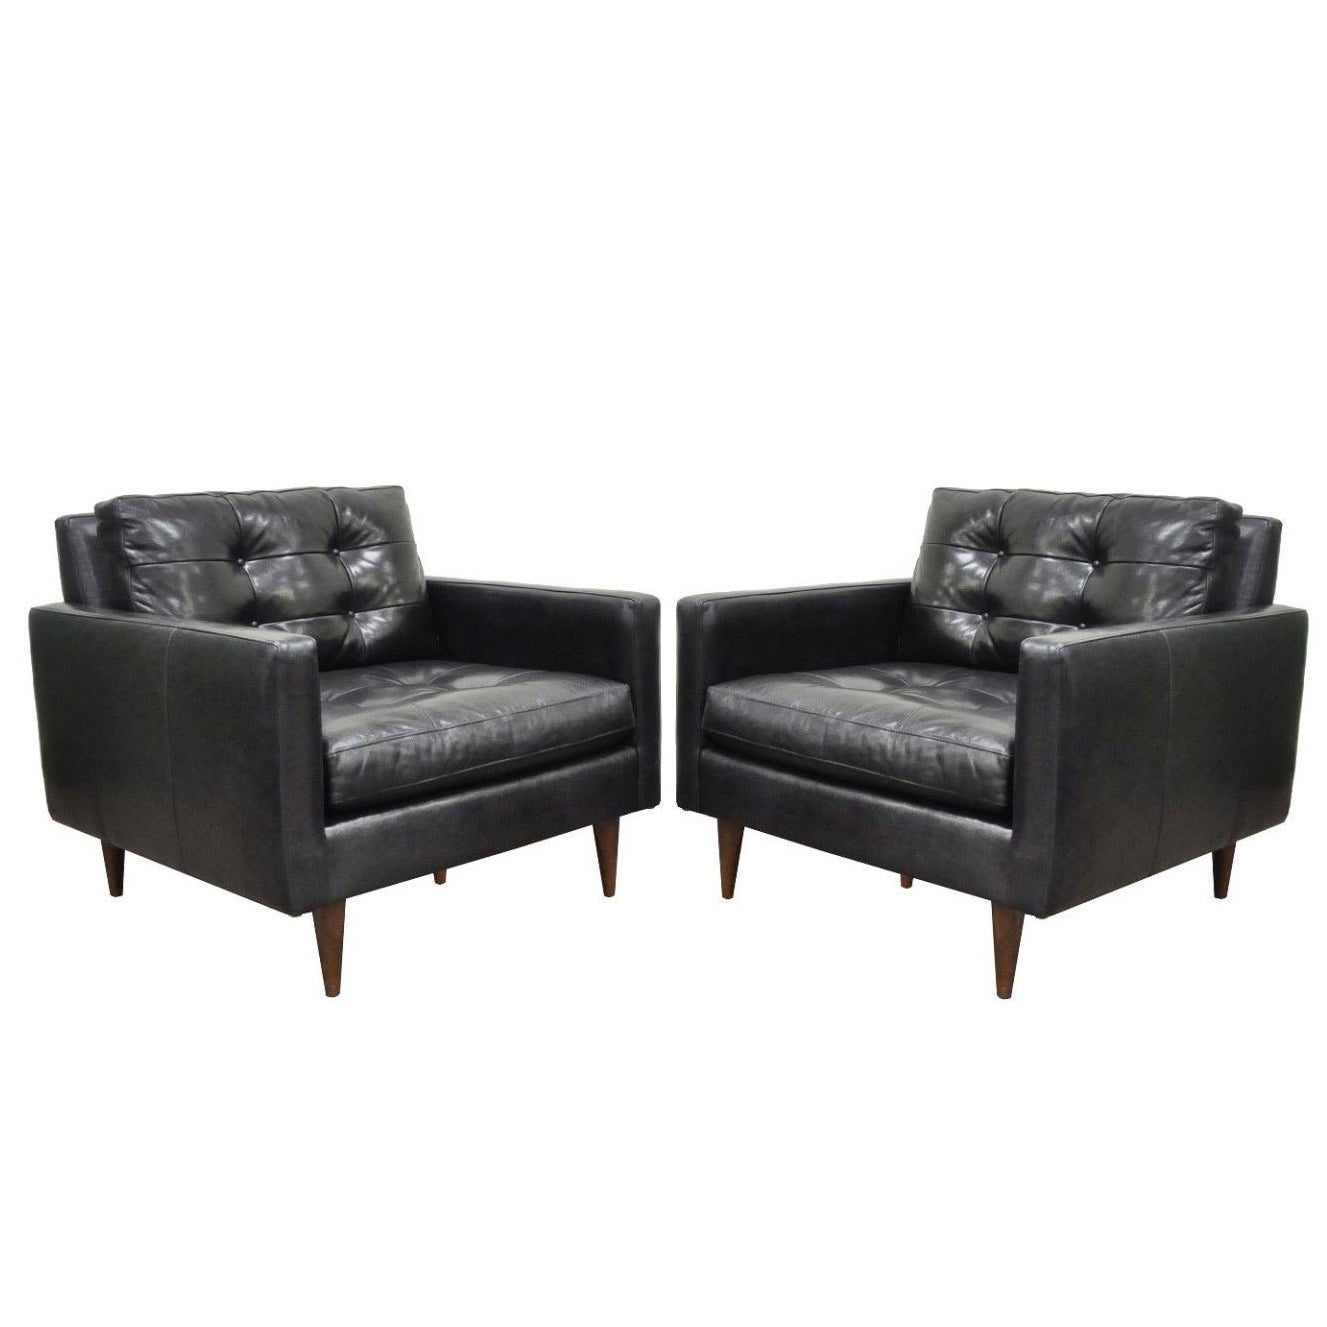 Pair Of Crate And Barrel Petrie Tufted Leather Black Modern Club